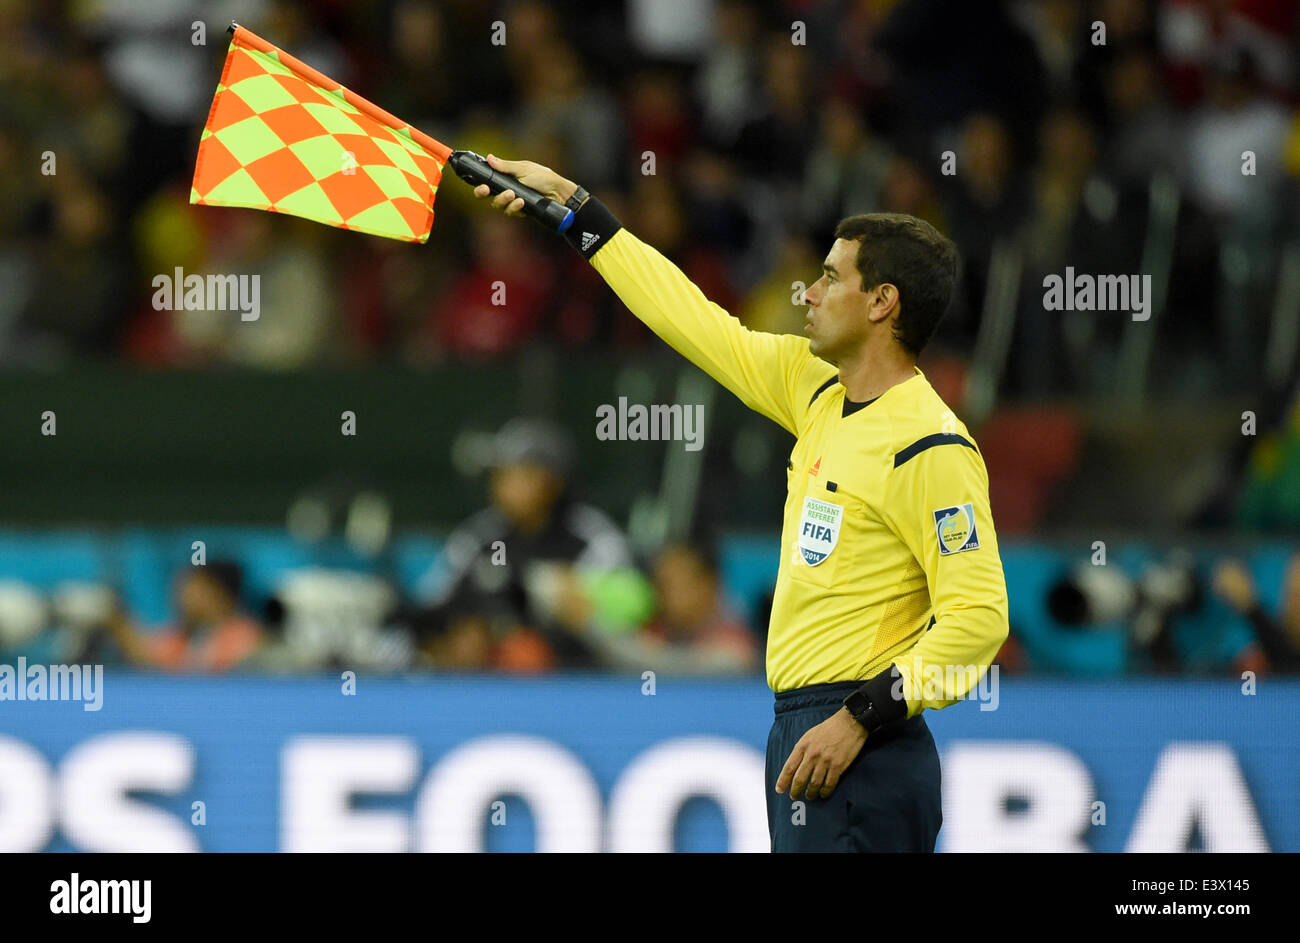 Porto Alegre, Brazil. 30th June, 2014. Assistant referee Marcelo van Gasse of Brazil seen during the FIFA World Cup 2014 round of 16 soccer match between Germany and Algeria at the Estadio Beira-Rio in Porto Alegre, Brazil, 30 June 2014. Photo: Marcus Brandt/dpa/Alamy Live News Stock Photo